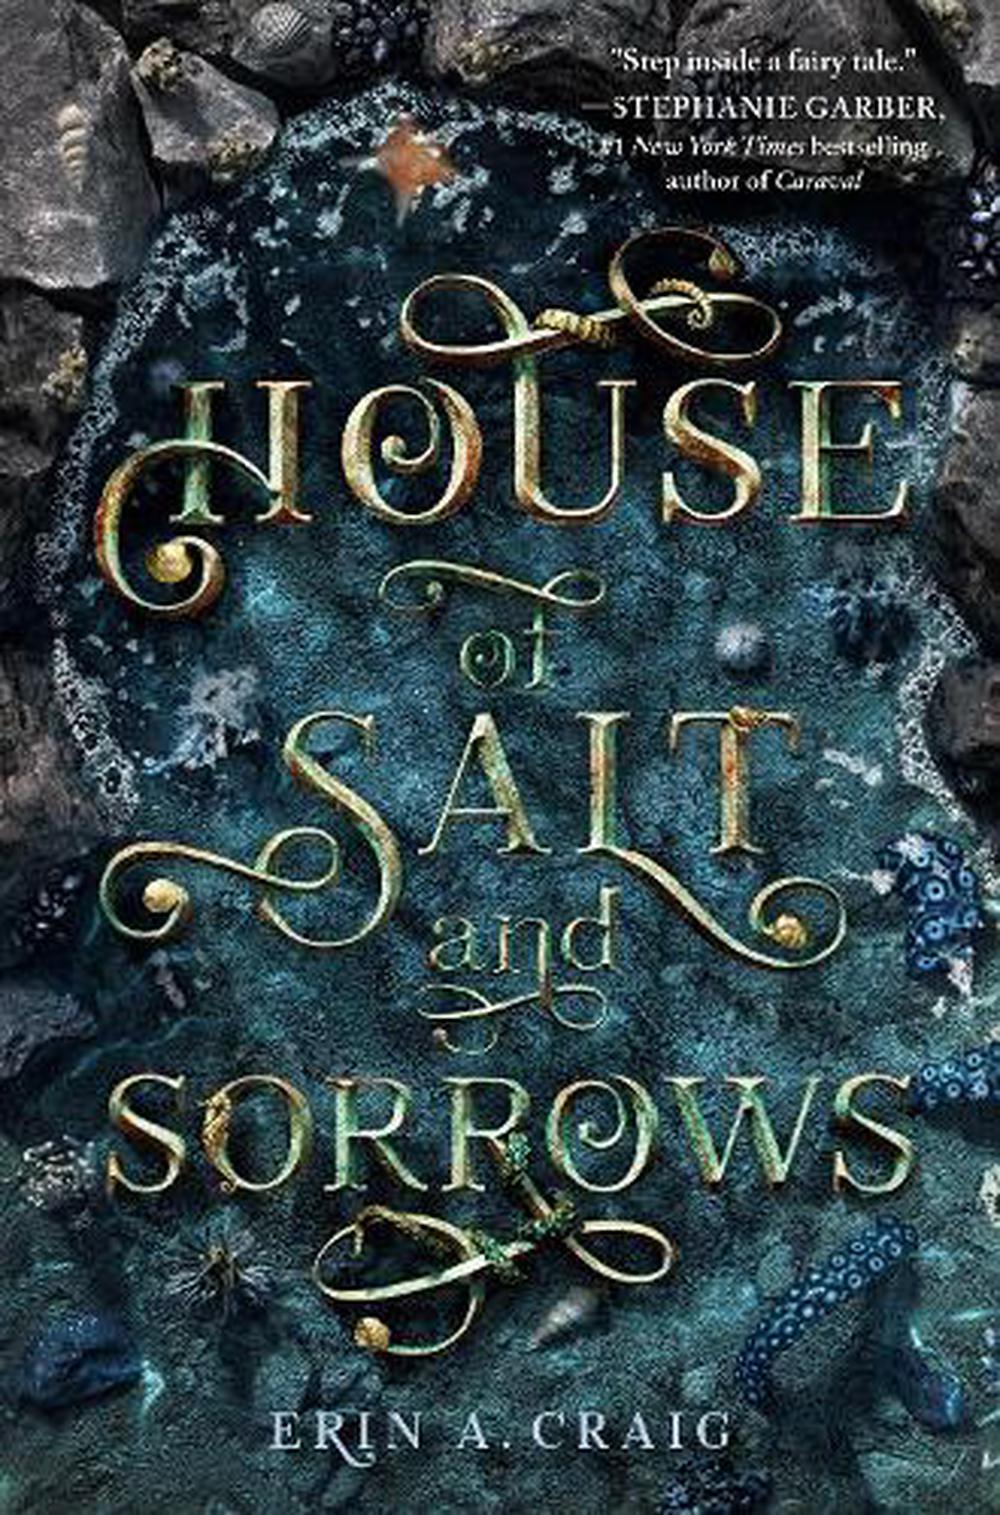 house of salt and sorrows book 2